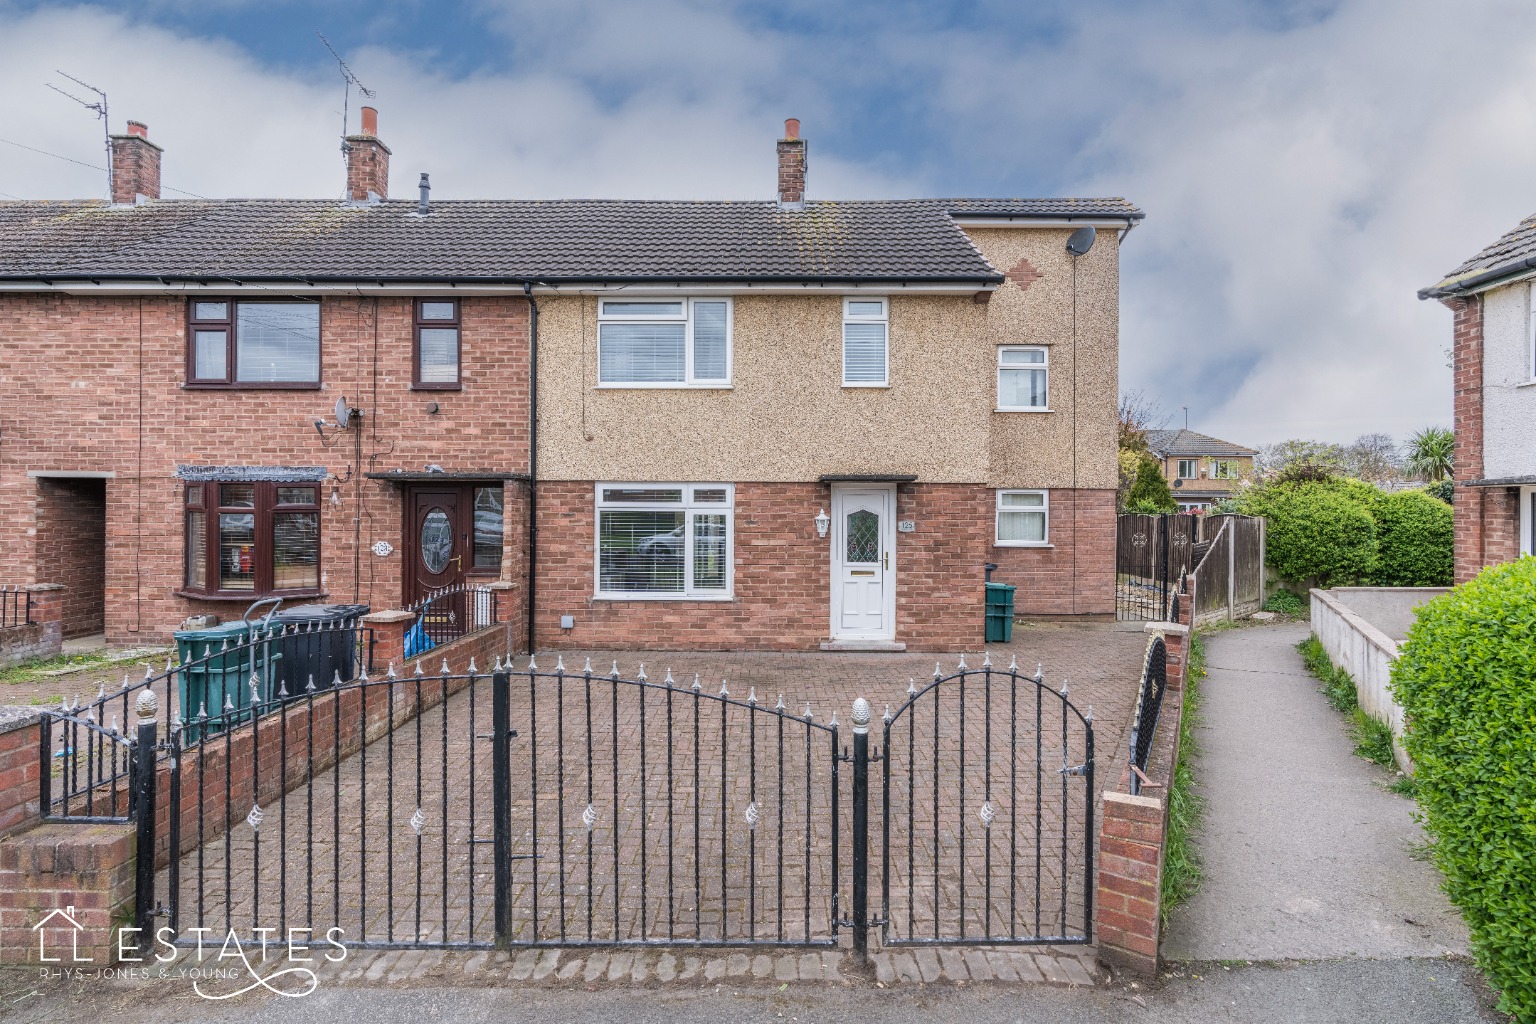 3 bed end of terrace house for sale in Ffordd-Y-Morfa  - Property Image 1